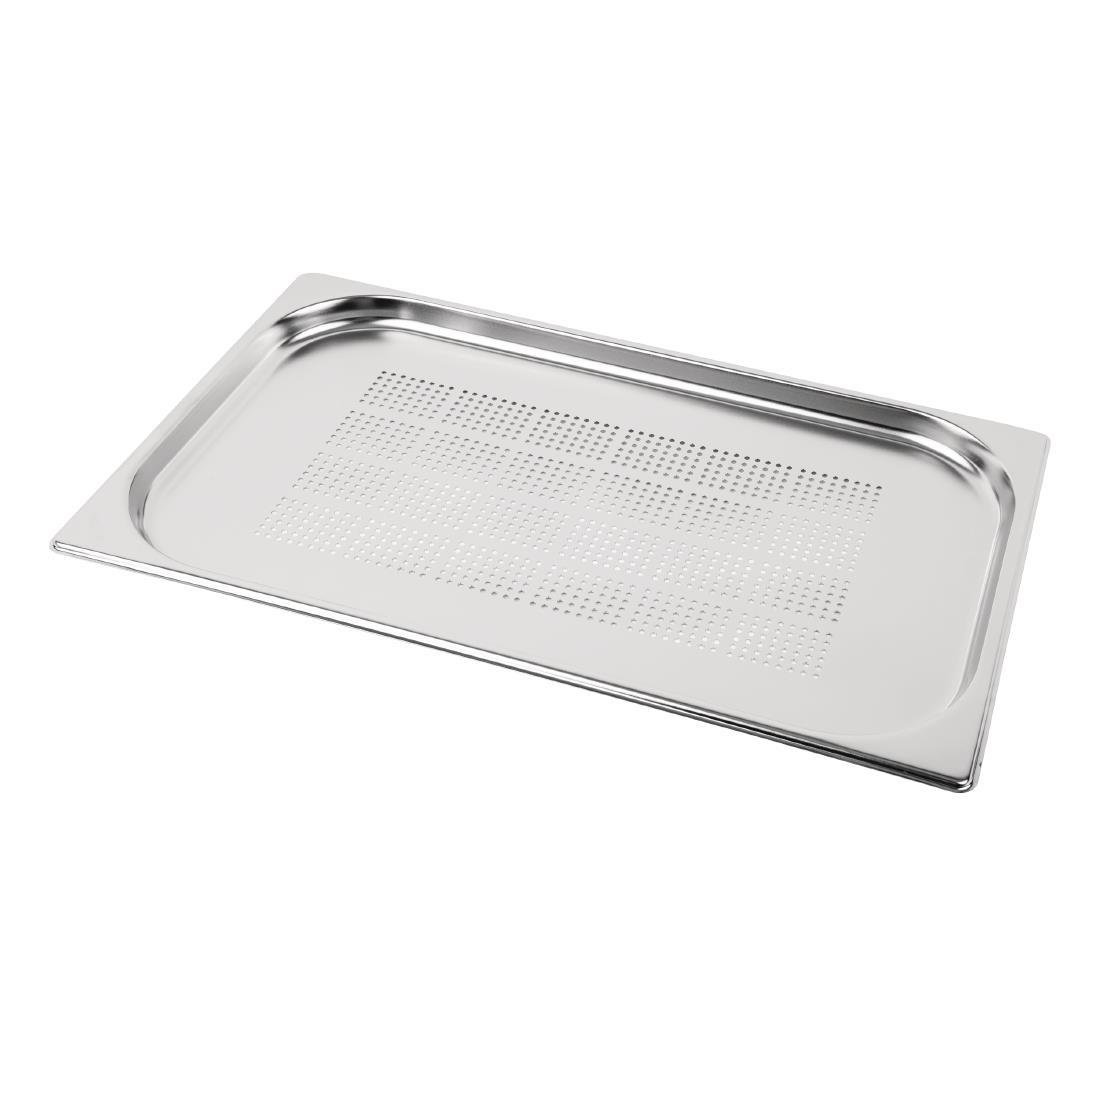 Vogue Stainless Steel Perforated 1/1 Gastronorm Pan 20mm - K827  - 2